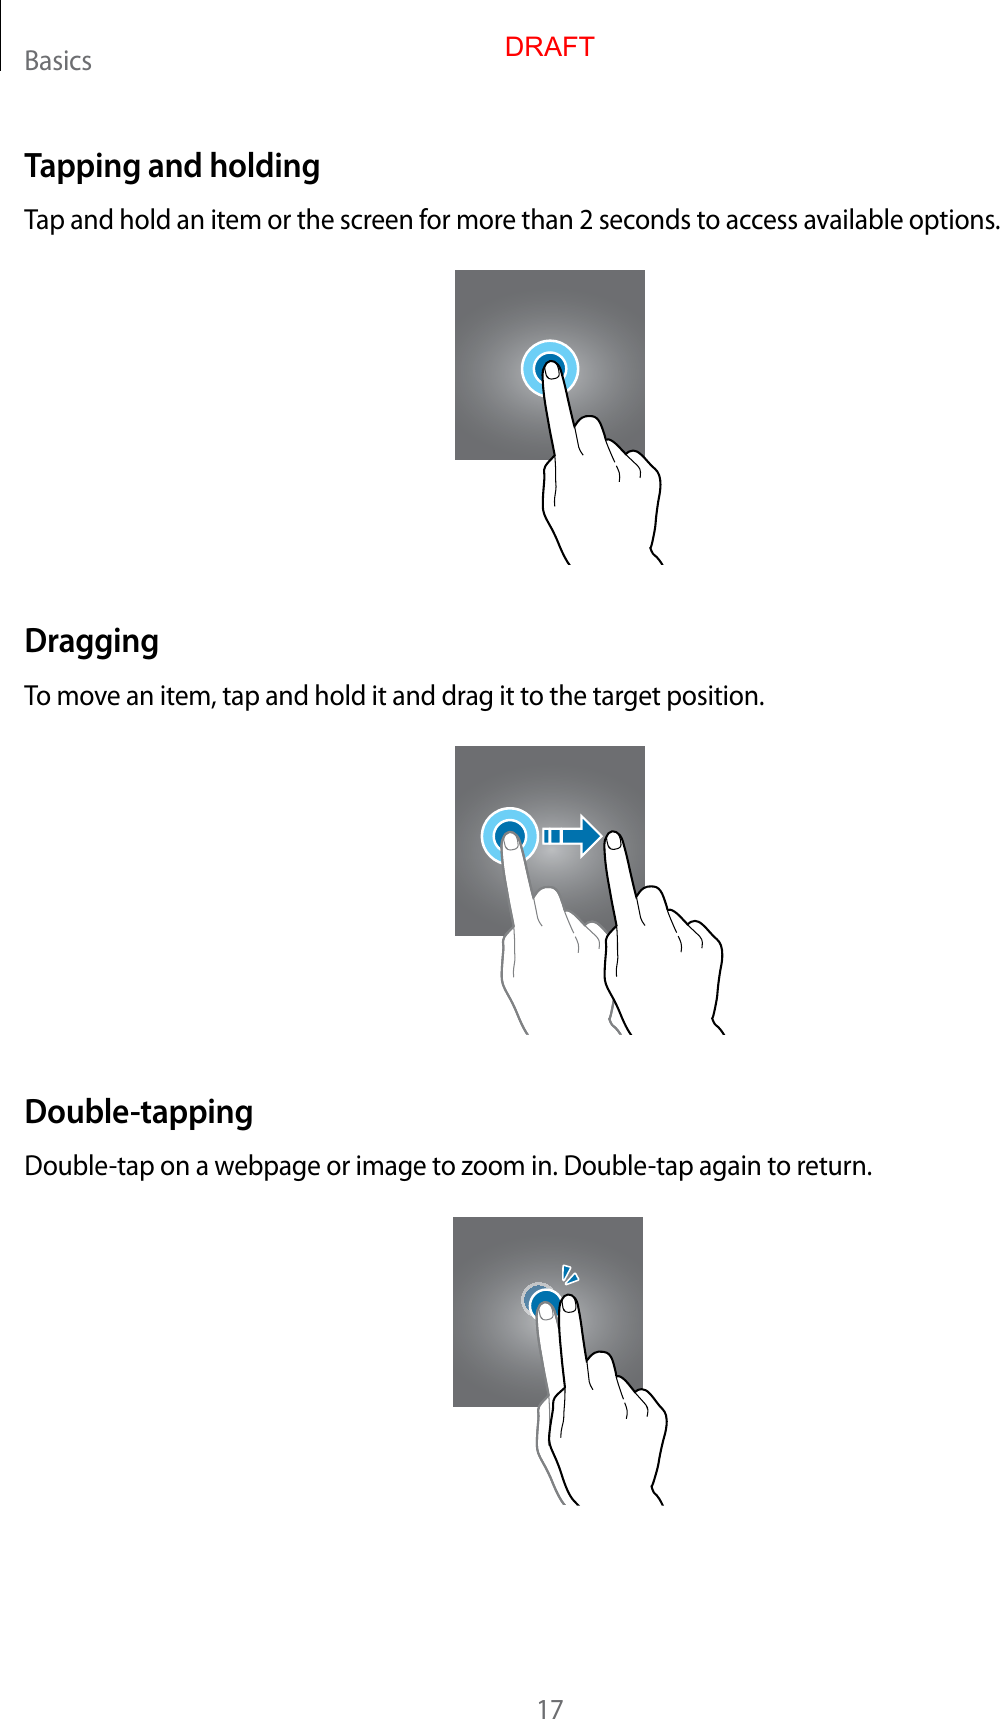 Basics17Tapping and holdingTap and hold an item or the screen f or mor e than 2 sec onds to ac cess a v ailable options .DraggingTo move an it em, tap and hold it and dr ag it to the tar get position.Double-tappingDouble-tap on a webpage or image to zoom in. Double-tap again to return.DRAFT